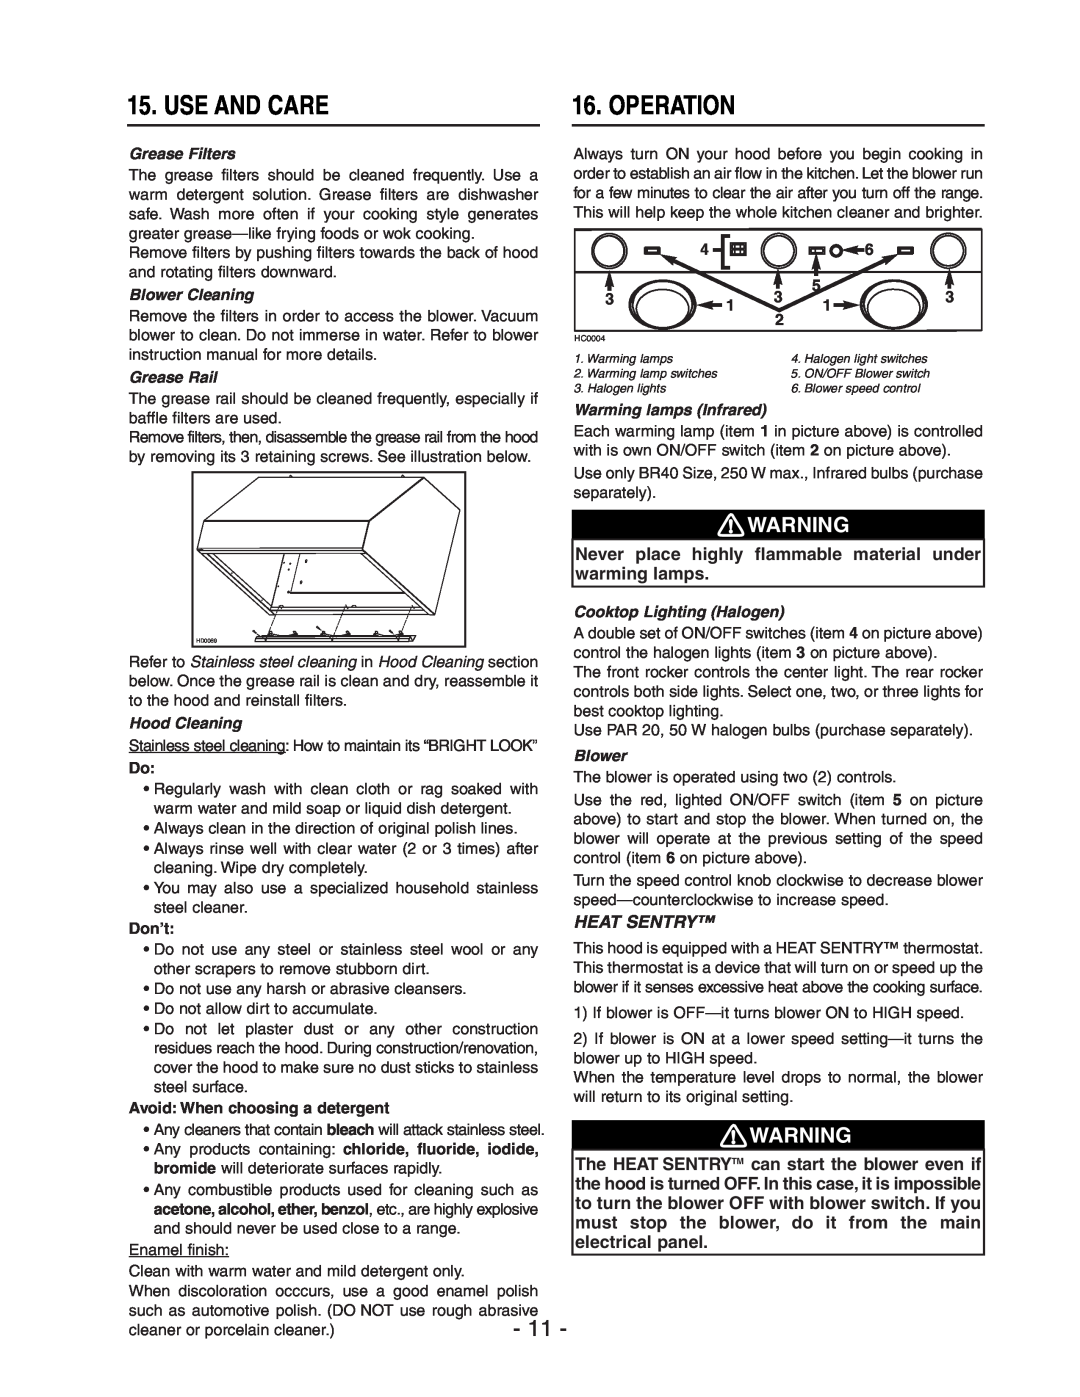 NuTone NP60000 installation instructions Use And Care, Operation, Heat Sentry 